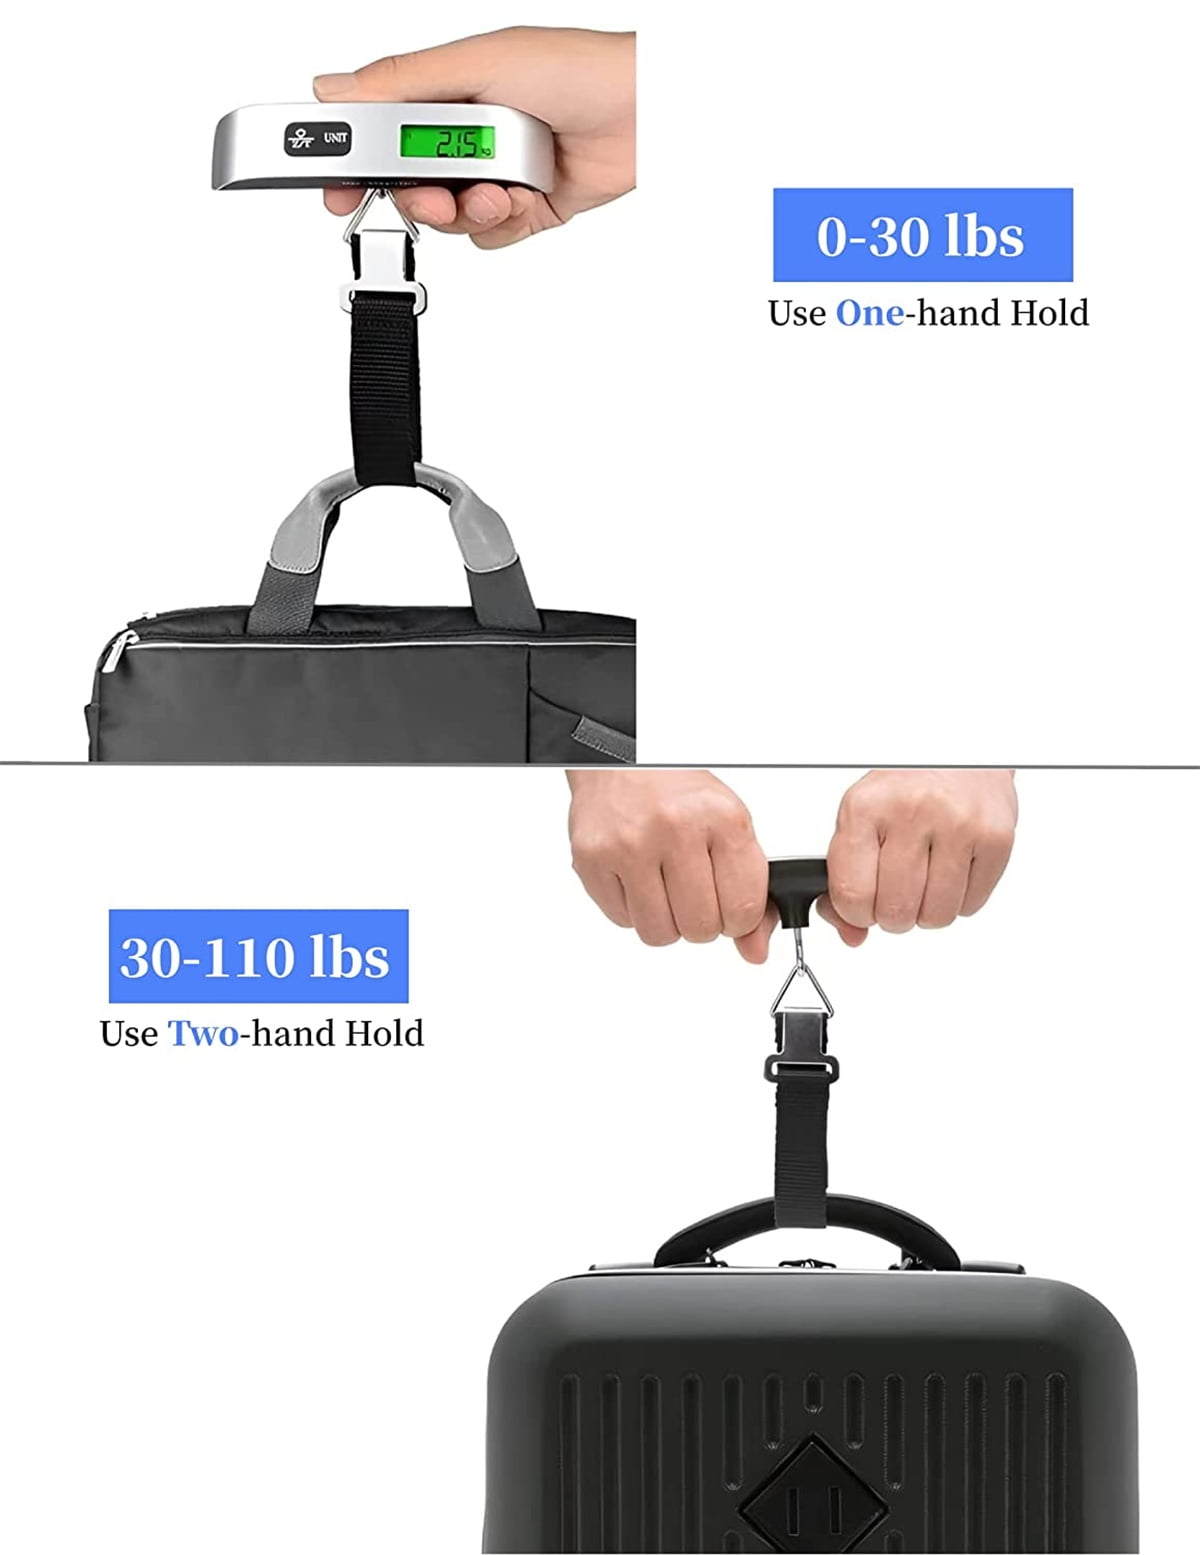 Digital Luggage Scale 2 Pack Fosmon Digital LCD Display Backlight with Temperature Sensor Hanging Luggage Weight Scale Up to 110lb